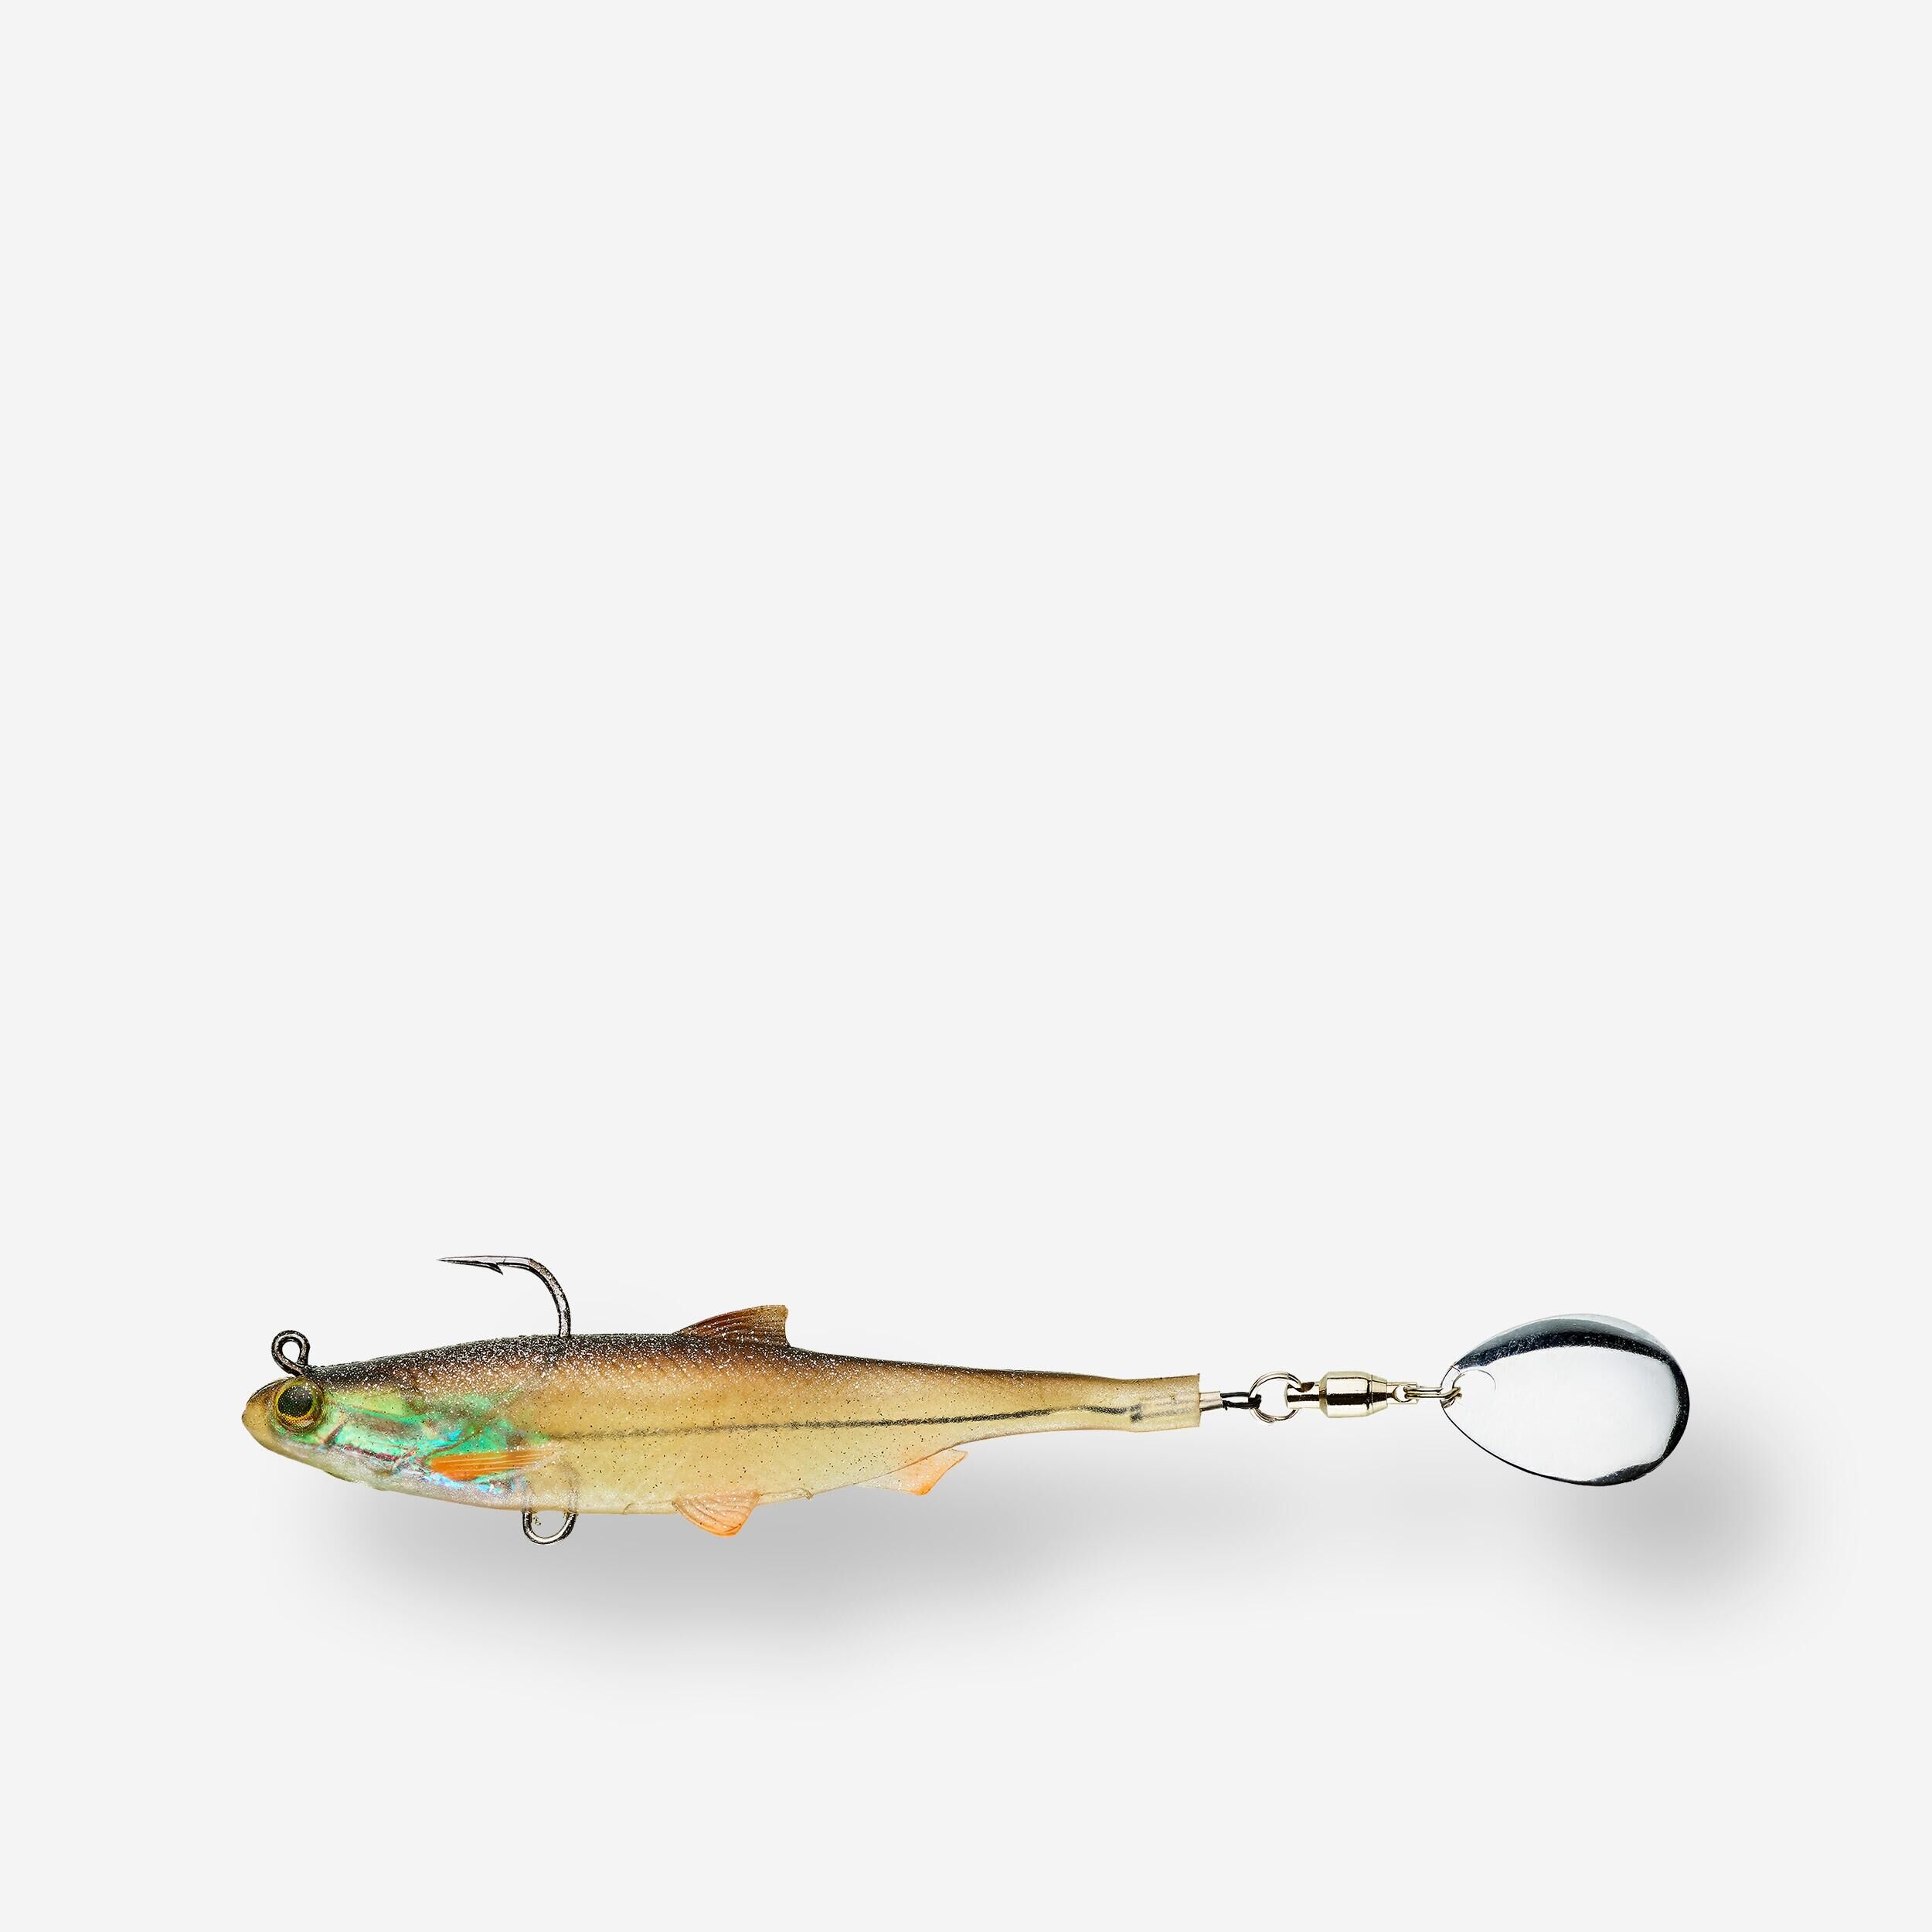 CAPERLAN LURE FISHING ROACHSPIN 70 ROACH BLADED SHAD SOFT LURE